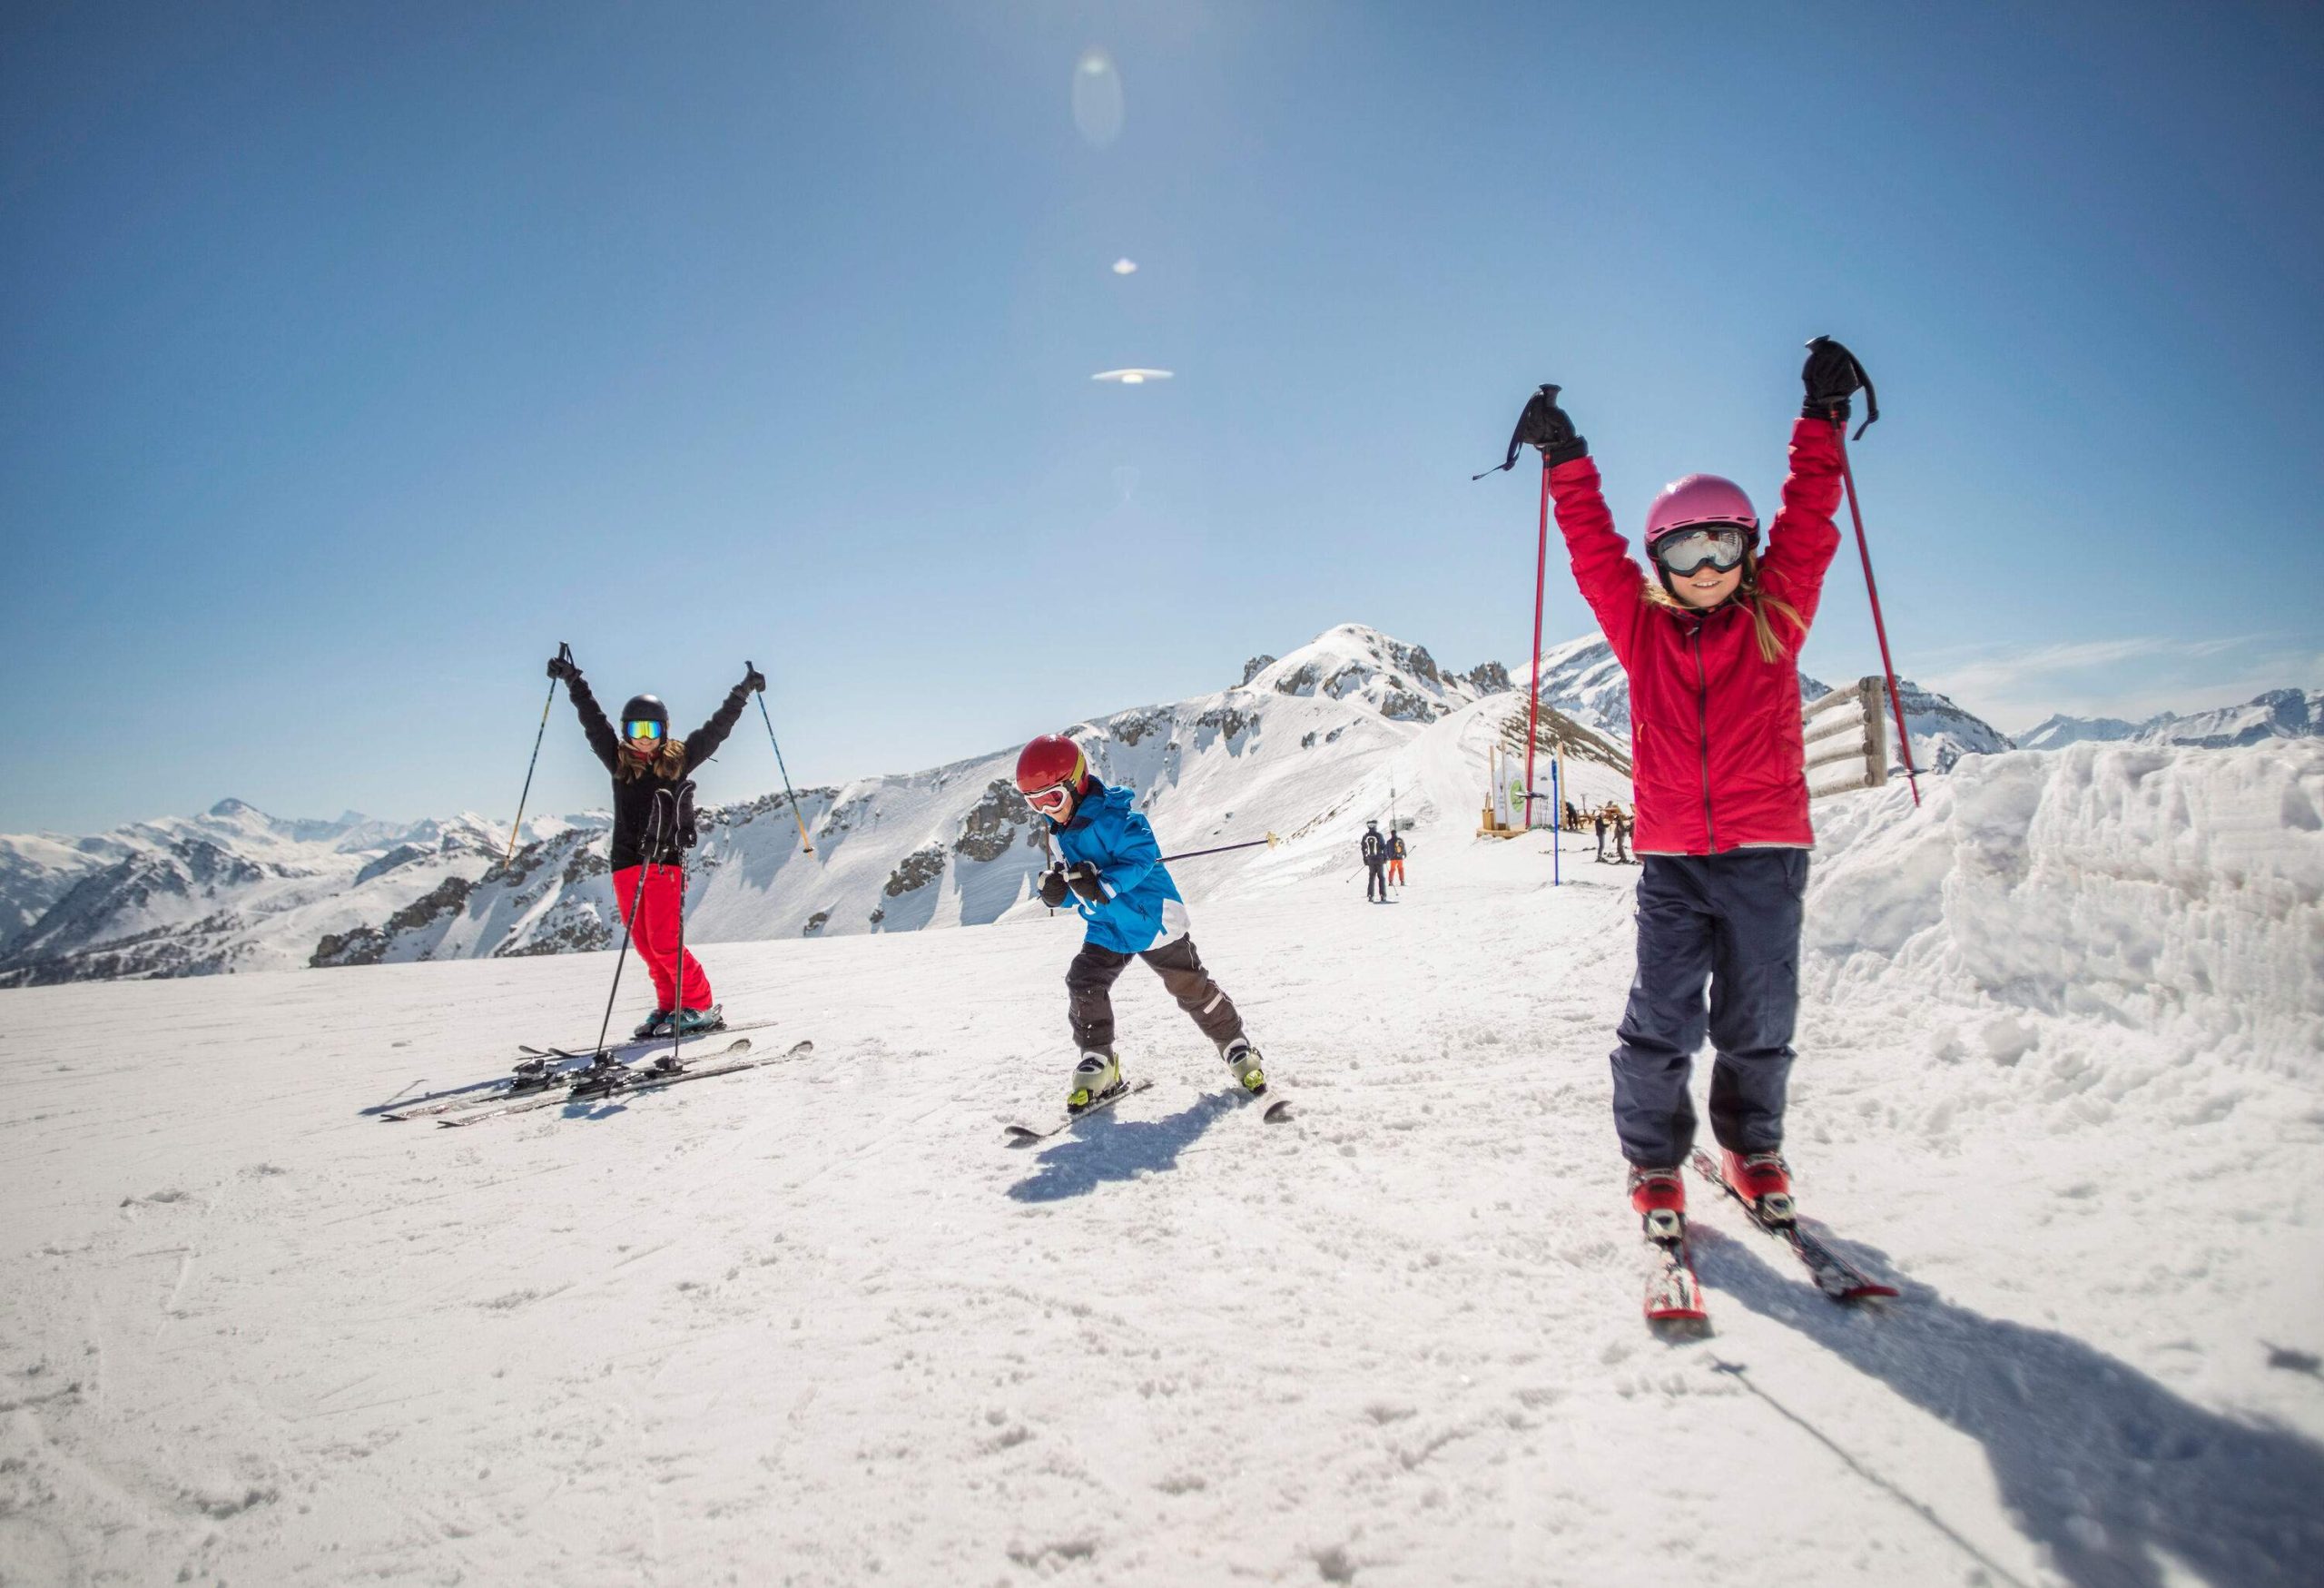 A woman and two children go skiing in the snowy mountains.